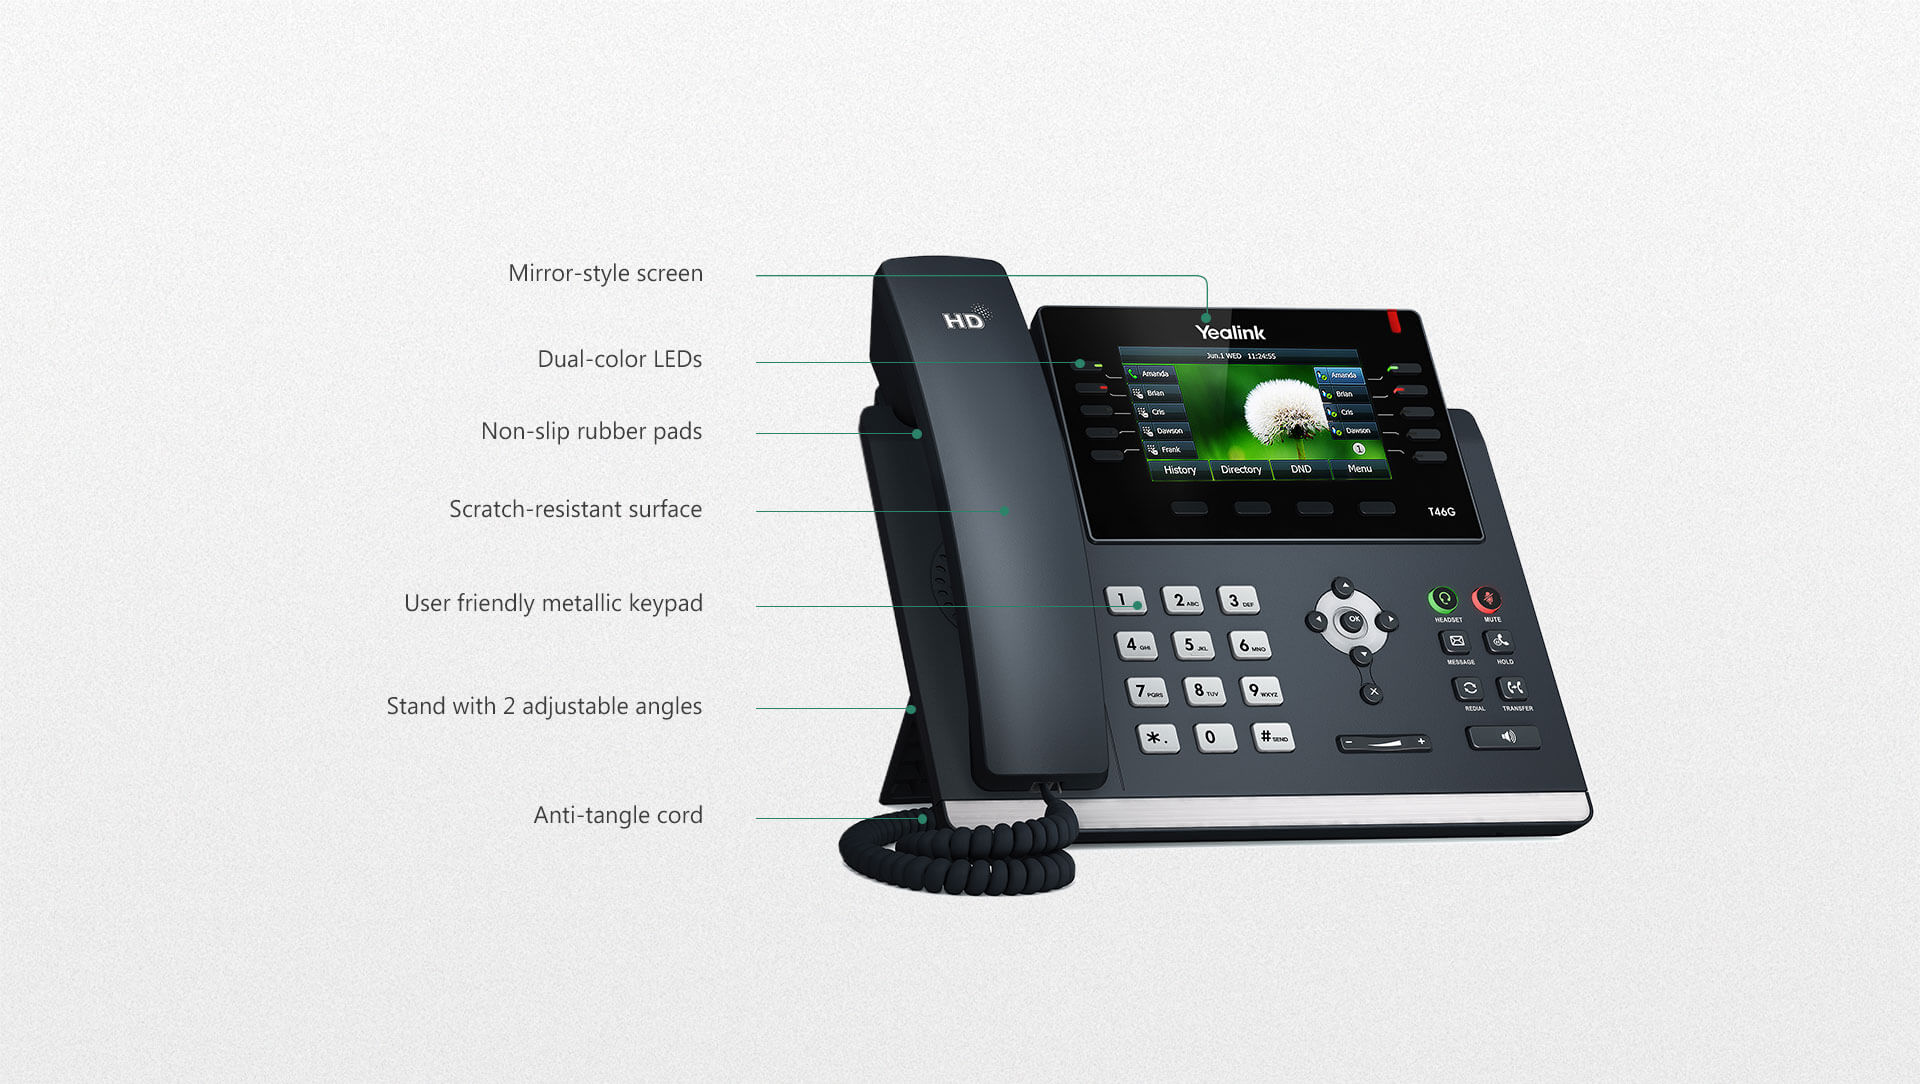 SIP-T46G - Hign-end Screen IP Phone - Voice Communication | Yealink